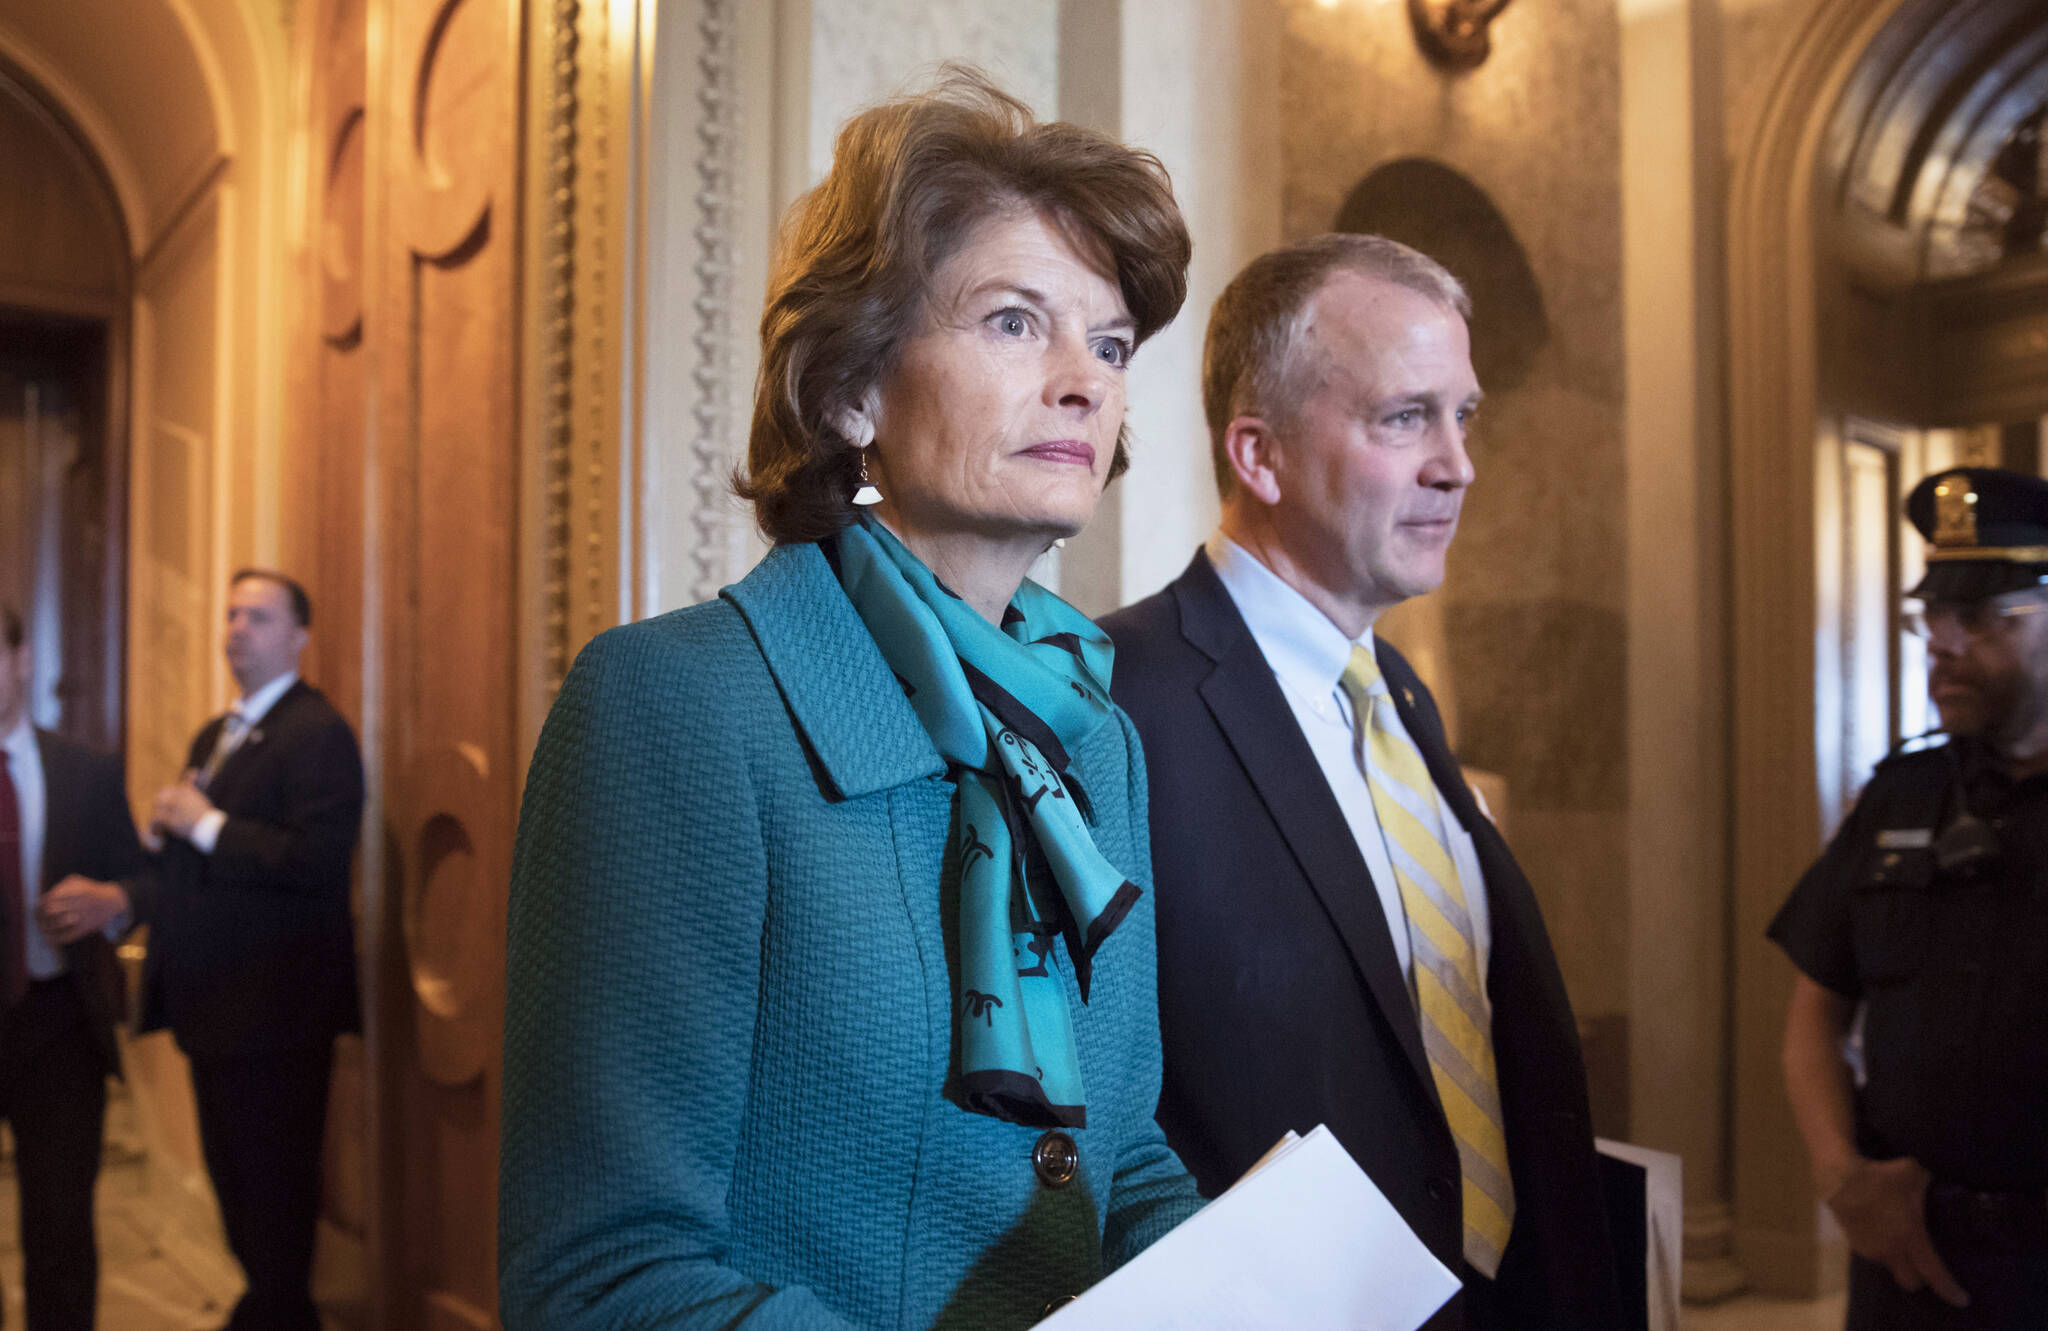 Sen. Lisa Murkowski, R-Alaska, and Sen. Dan Sullivan, R-Ark., leave the chamber after a vote on Capitol Hill in Washington, early Wednesday, May 10, 2017. A magistrate ruled Tuesday, Oct. 19, 2021, that there is probable cause for a case to continue against a man accused of threatening to kill Alaska’s two U.S. senators in profanity-filled voicemails left on their office phones. (AP Photo/J. Scott Applewhite, File)